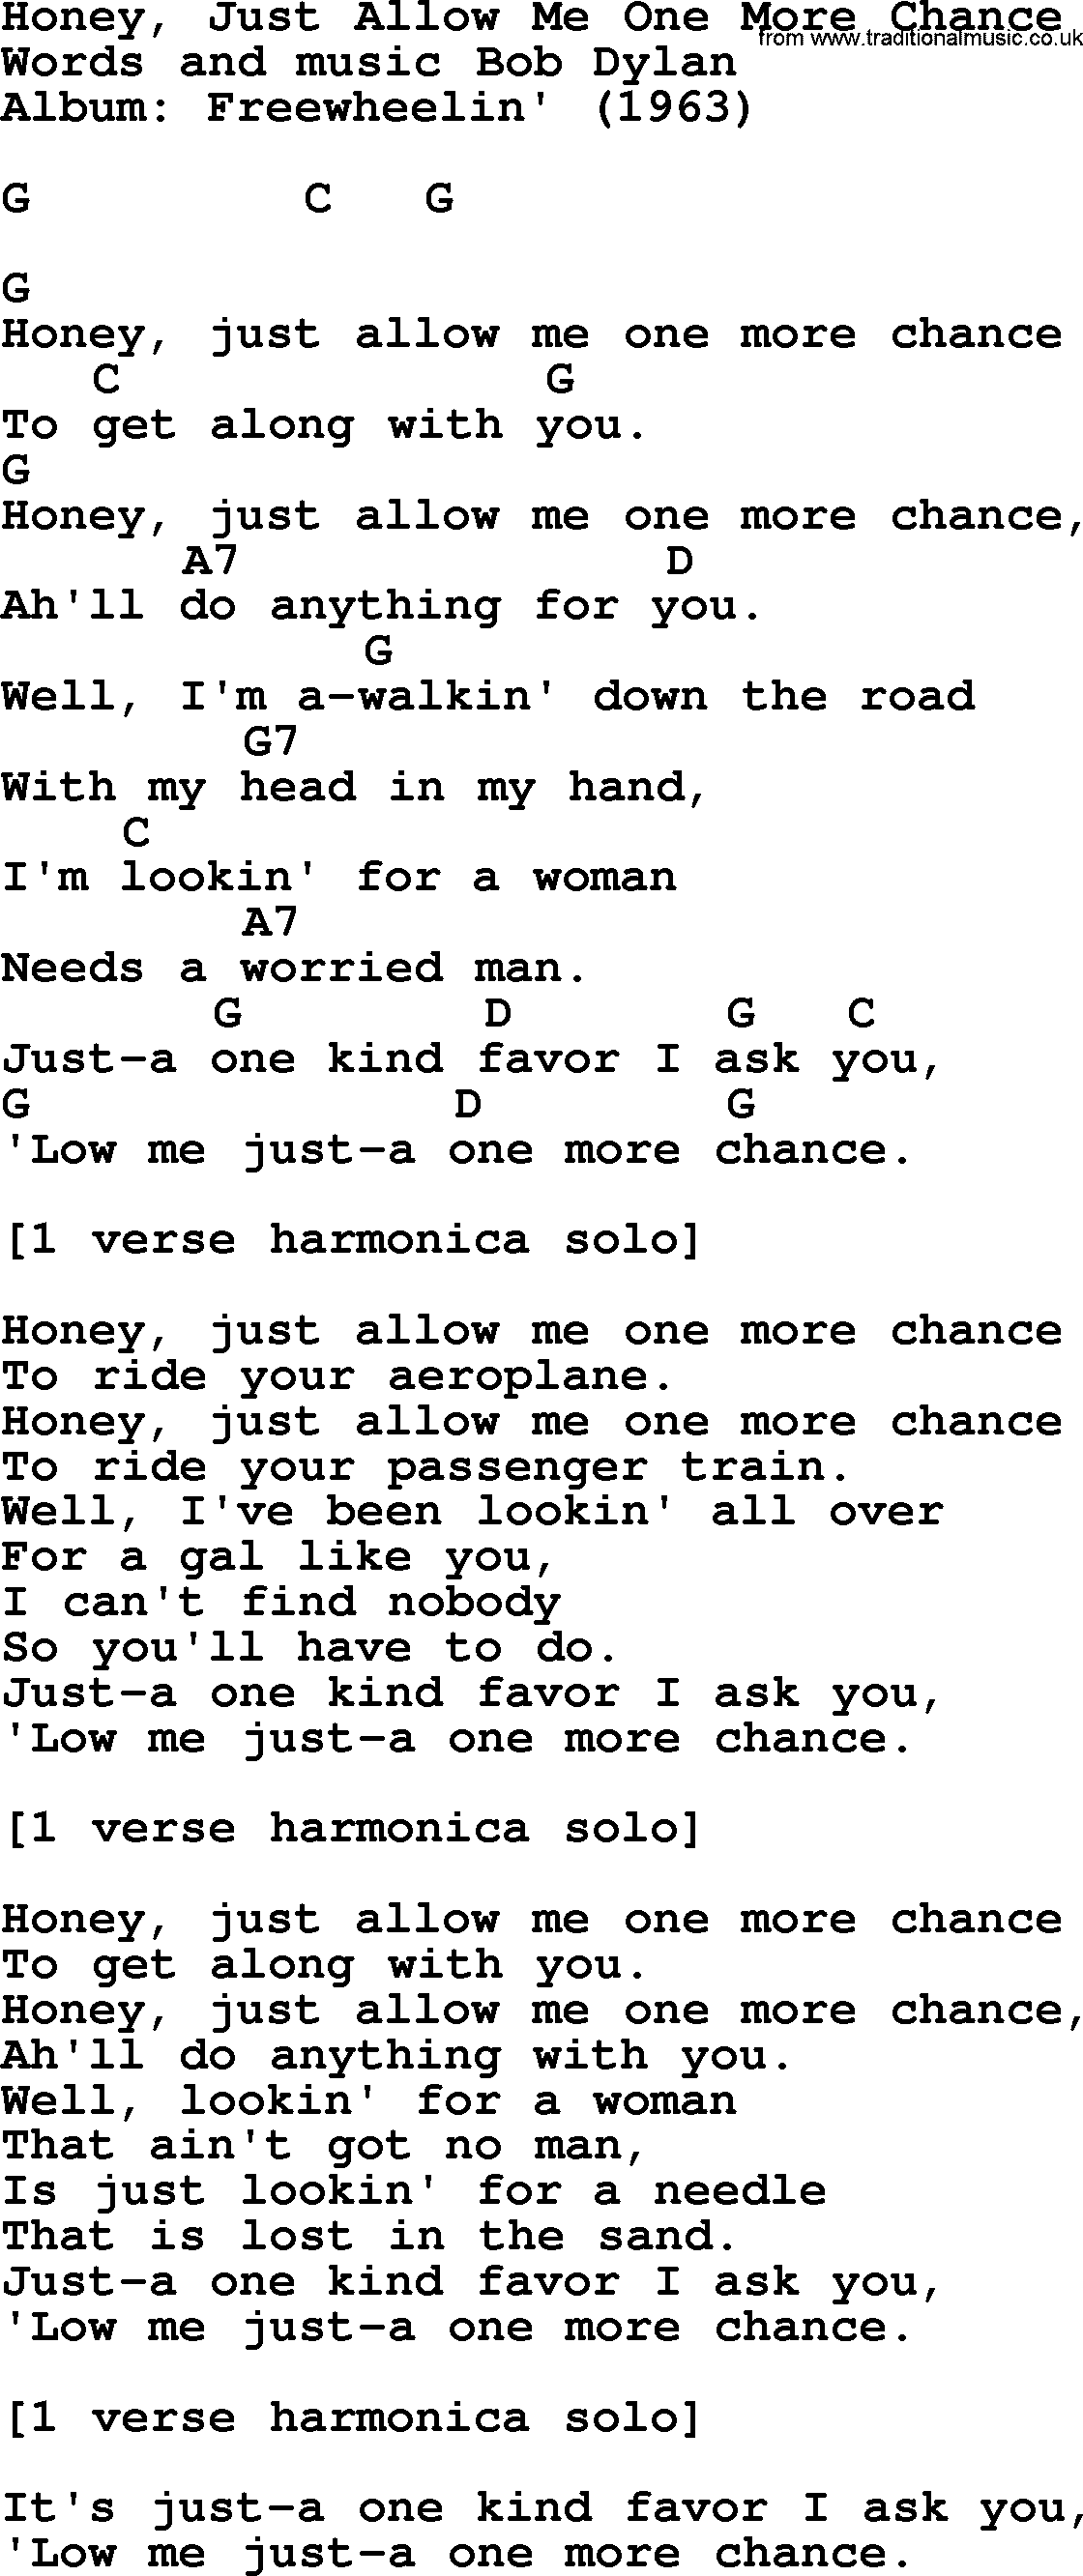 Bob Dylan song, lyrics with chords - Honey, Just Allow Me One More Chance